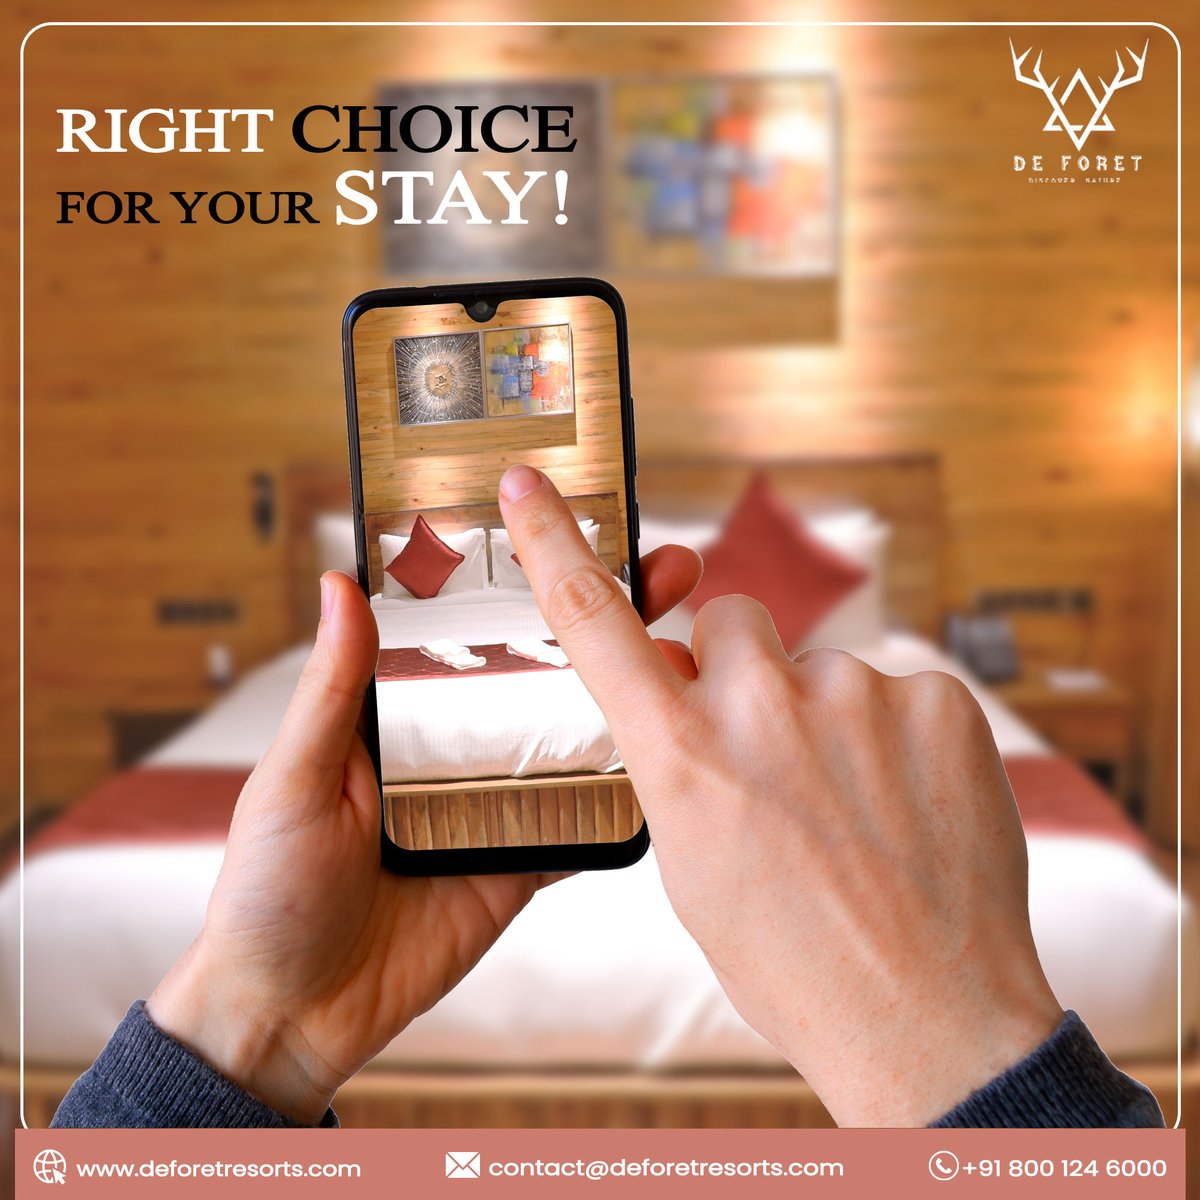 De Foret Resort - where the only wrong choice is choosing to leave! 

Book Your Stay:
Call: +91 80012 46000
Visit: deforetresorts.com
Email Us: contact@deforetresorts.com

#LuxuryLiving #NaturalBeauty #DeForet #MyDeforetExperience #deforetresorts #Andaman #andamanislands